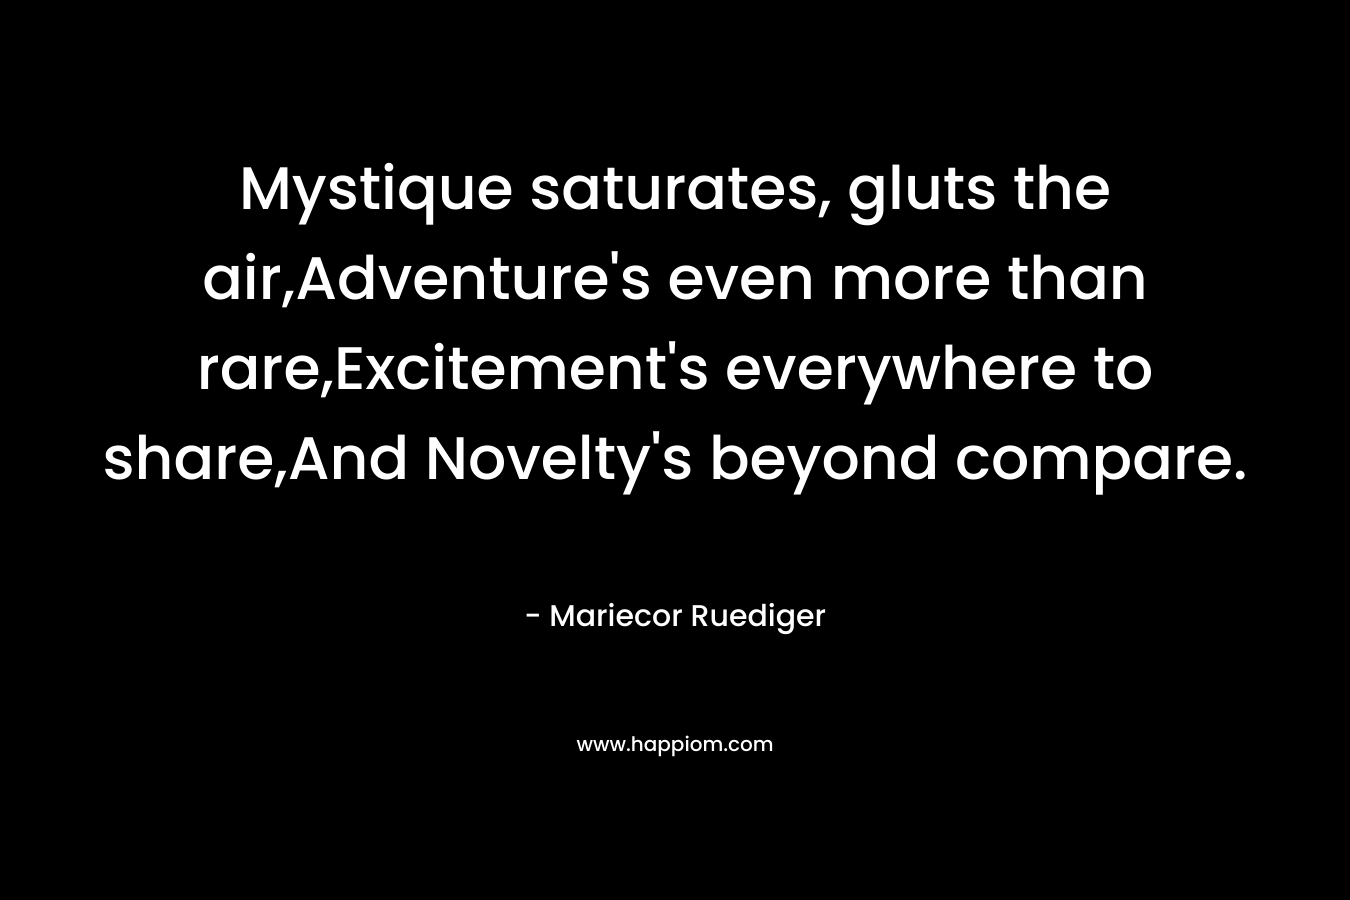 Mystique saturates, gluts the air,Adventure’s even more than rare,Excitement’s everywhere to share,And Novelty’s beyond compare. – Mariecor Ruediger